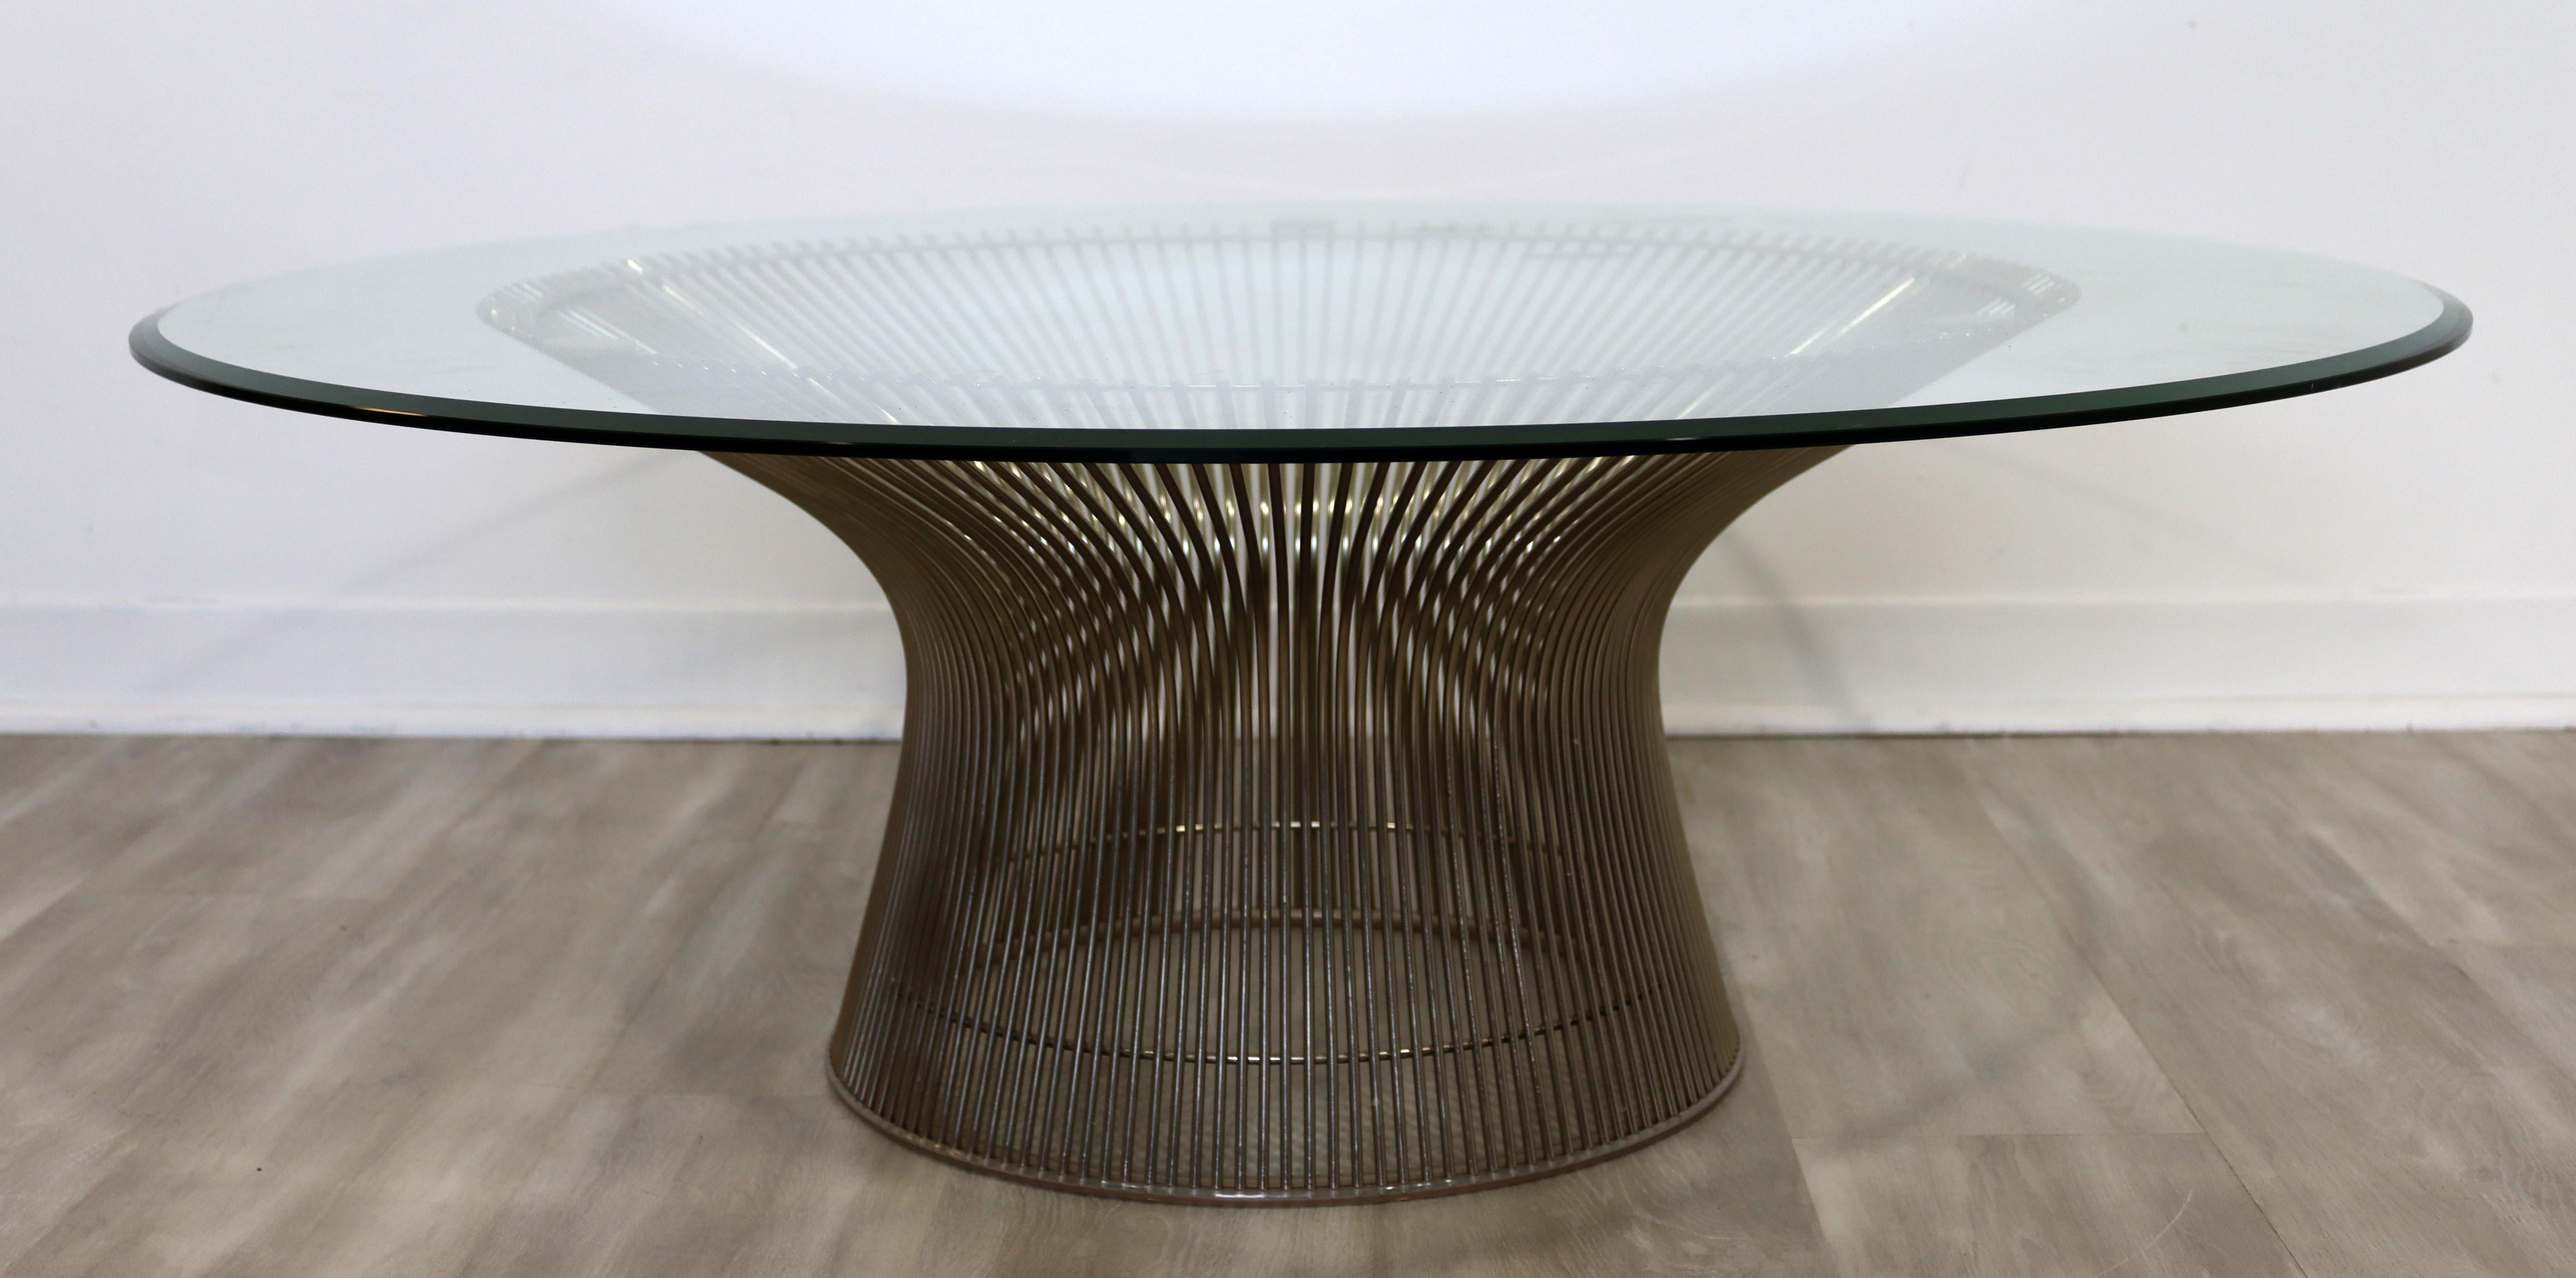 For your consideration is a fabulous, round coffee table, with a glass top on a chrome wire base, by Warren Platner, circa the 1960s. In excellent vintage condition. The dimensions are 42